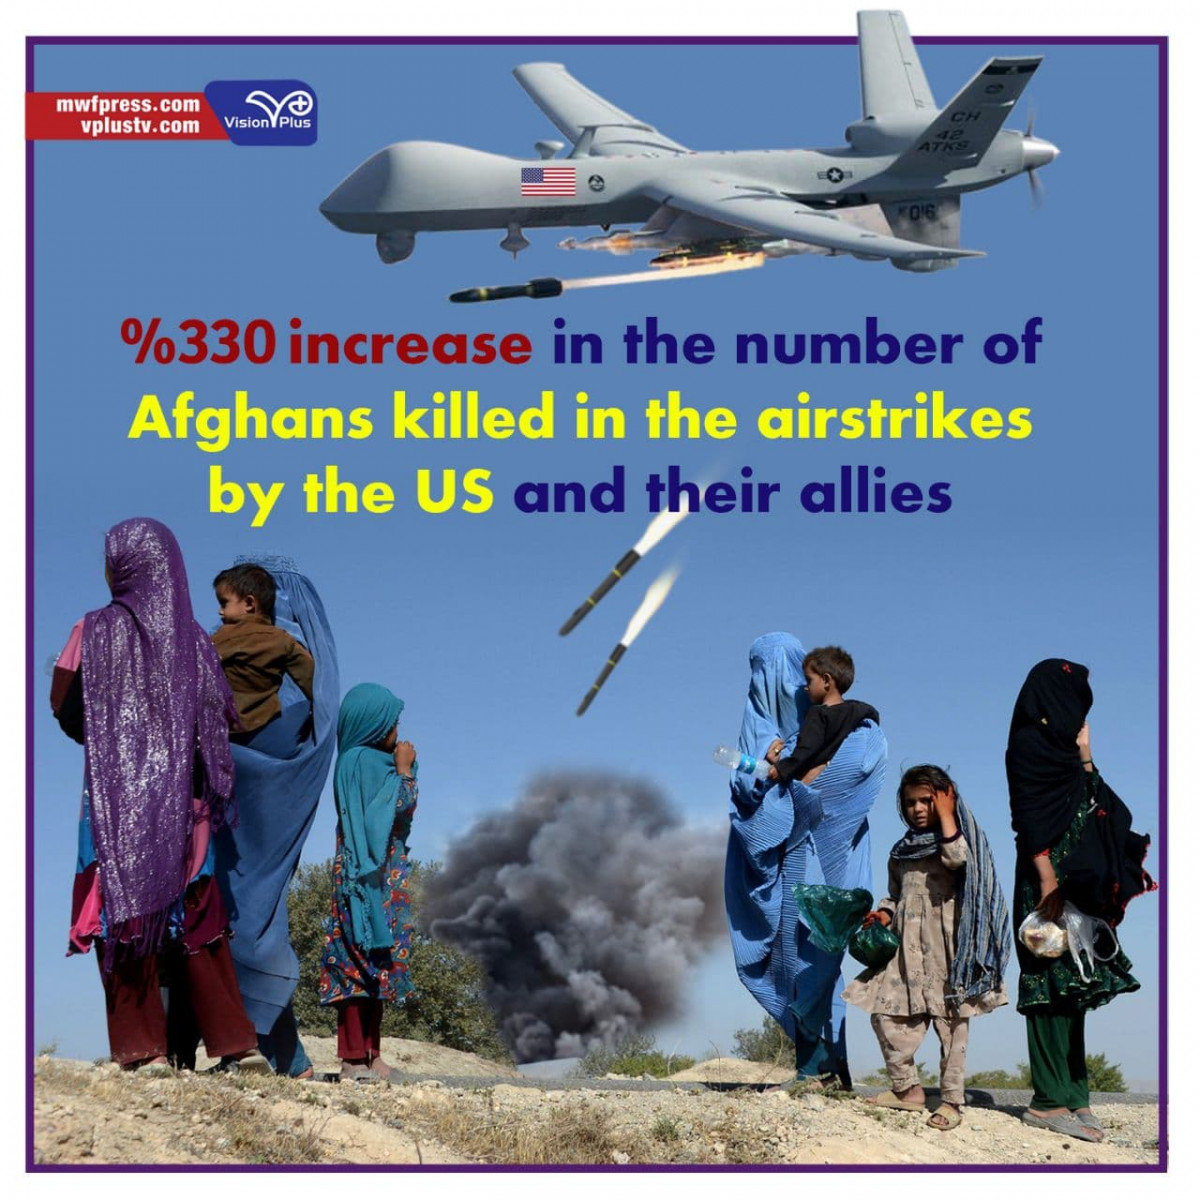 330% increase in the number of Afghans killed in the airstrikes by the US and their allies